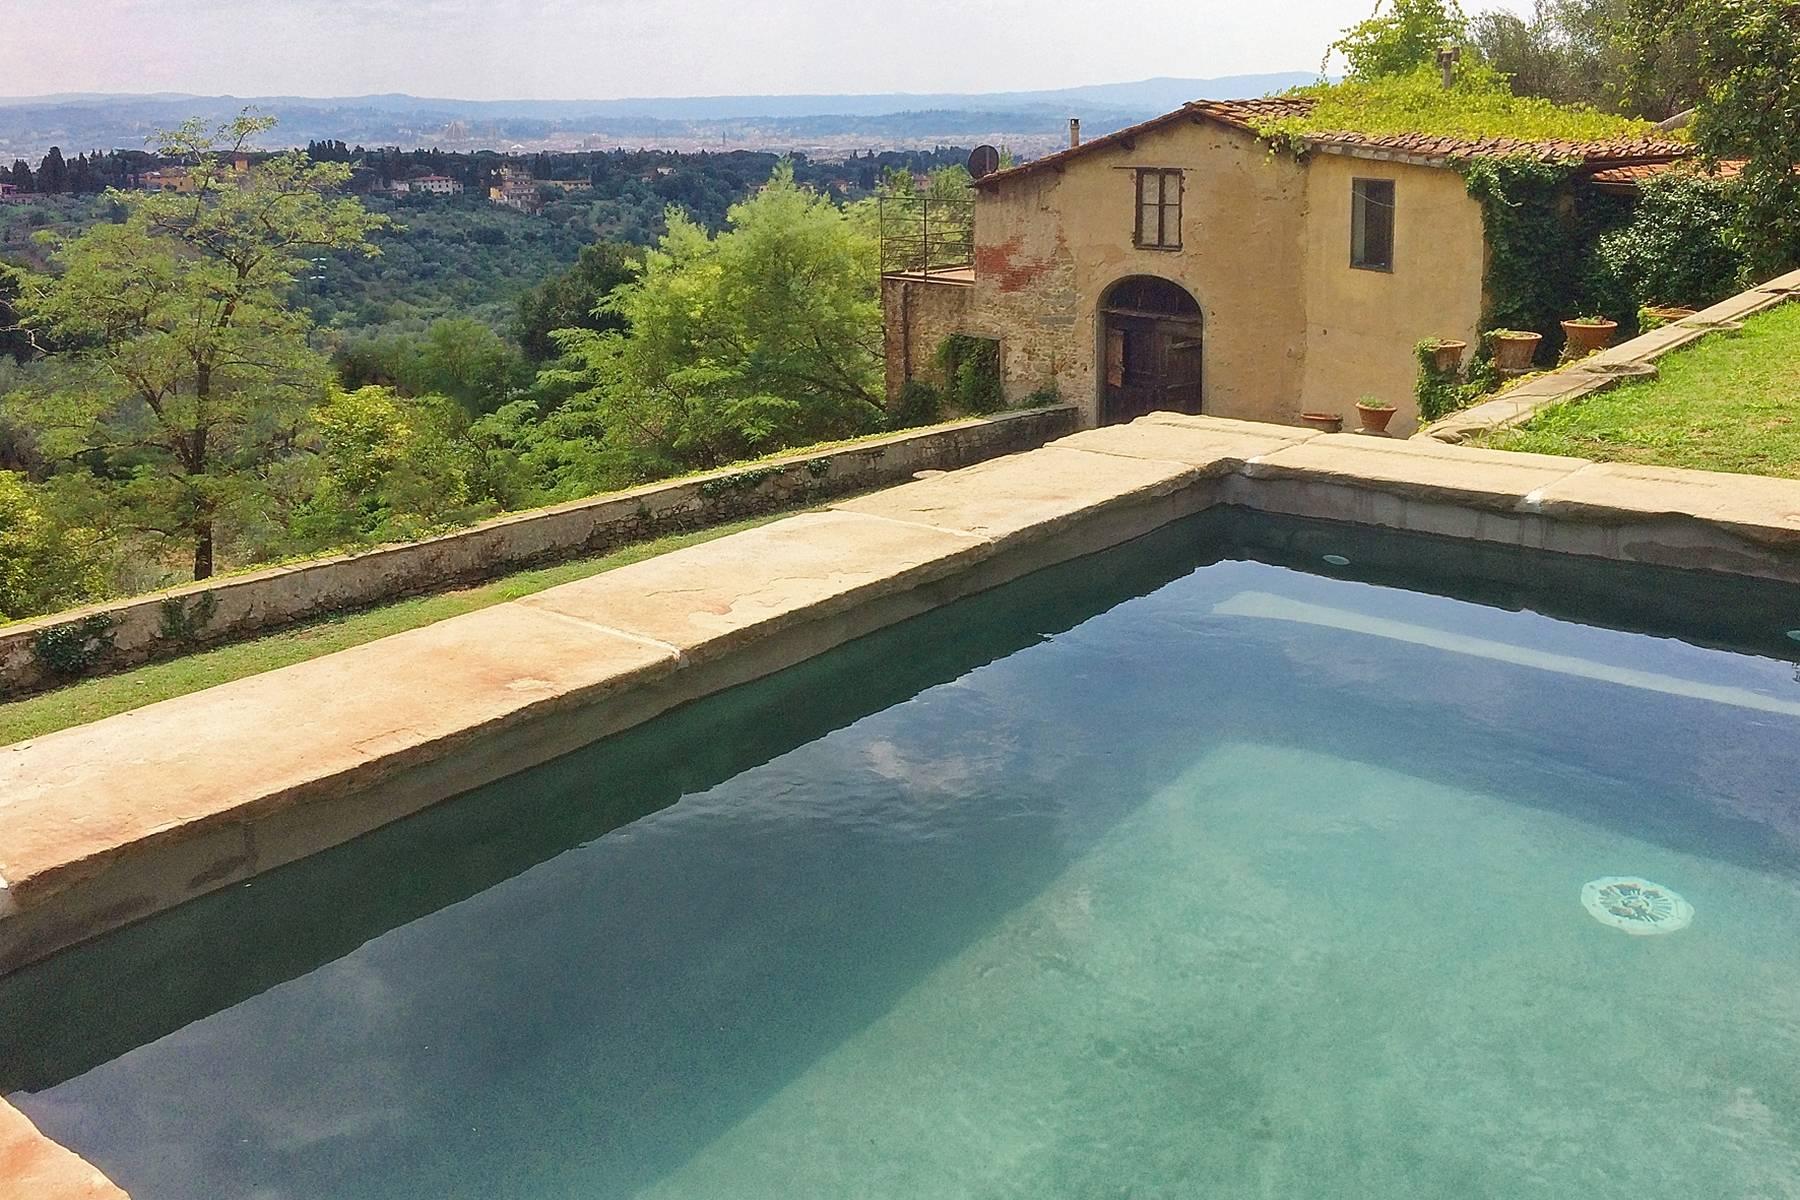 Beautiful 15th century villa with splendid views of Florence and the countryside - 5